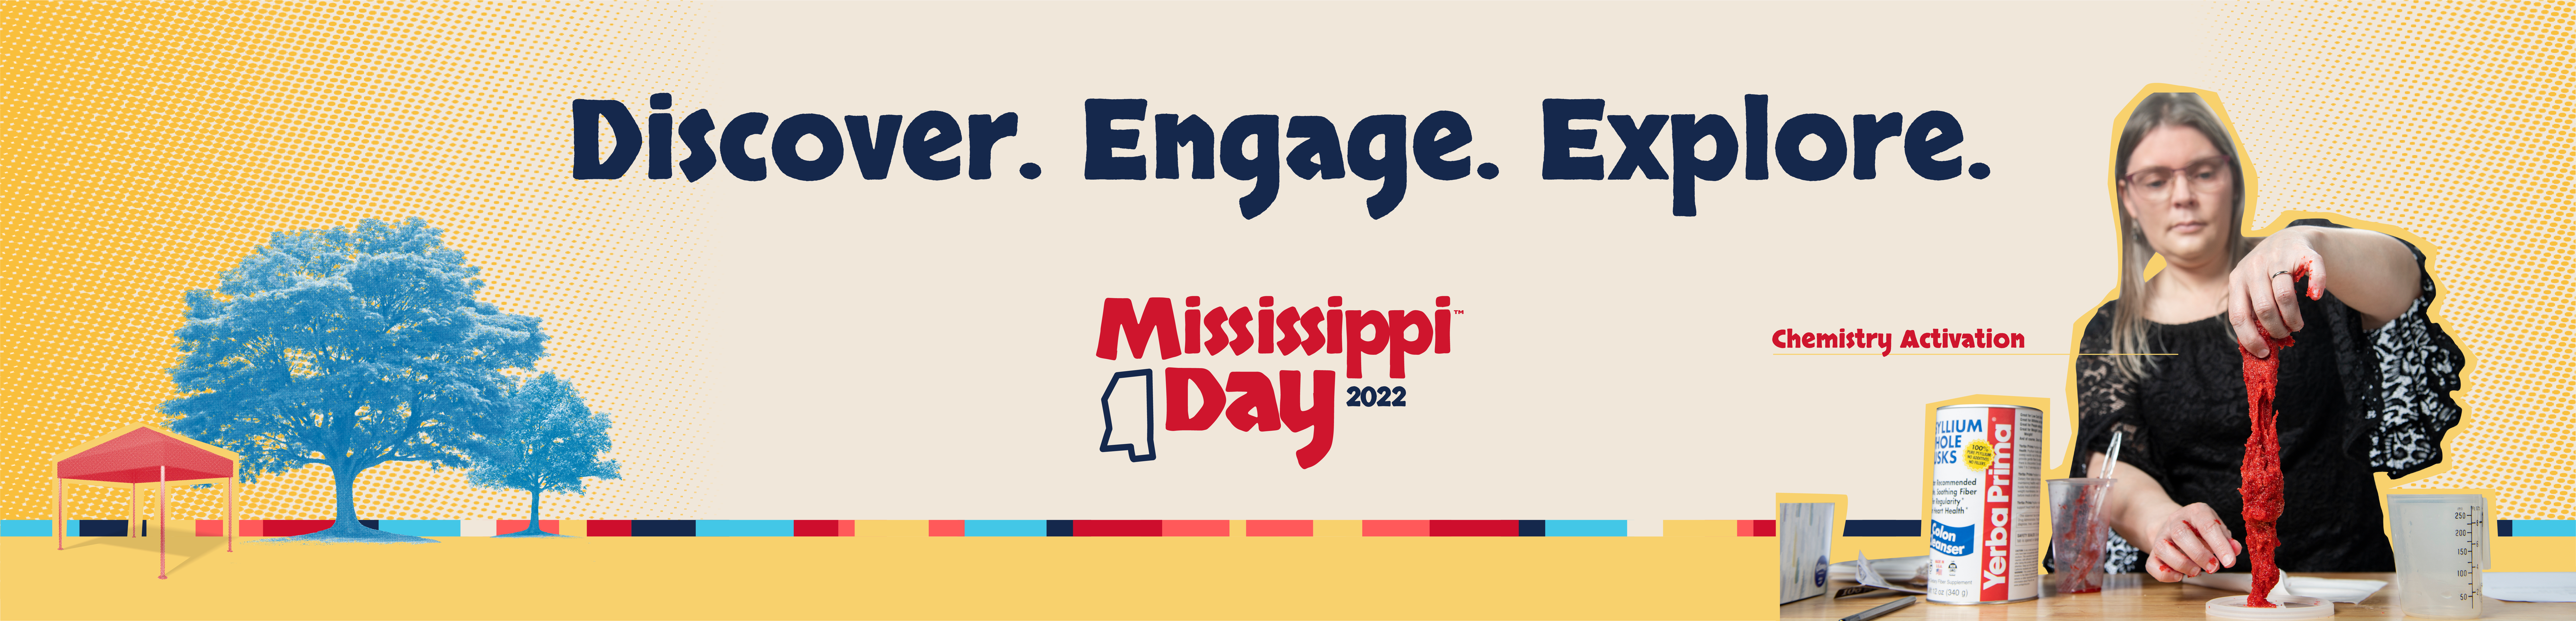 Mississippi Day Poster art, Text: Discover. Engage. Explore. Mississippi Day 2022, Chemistry Activation. Grove trees and research test.